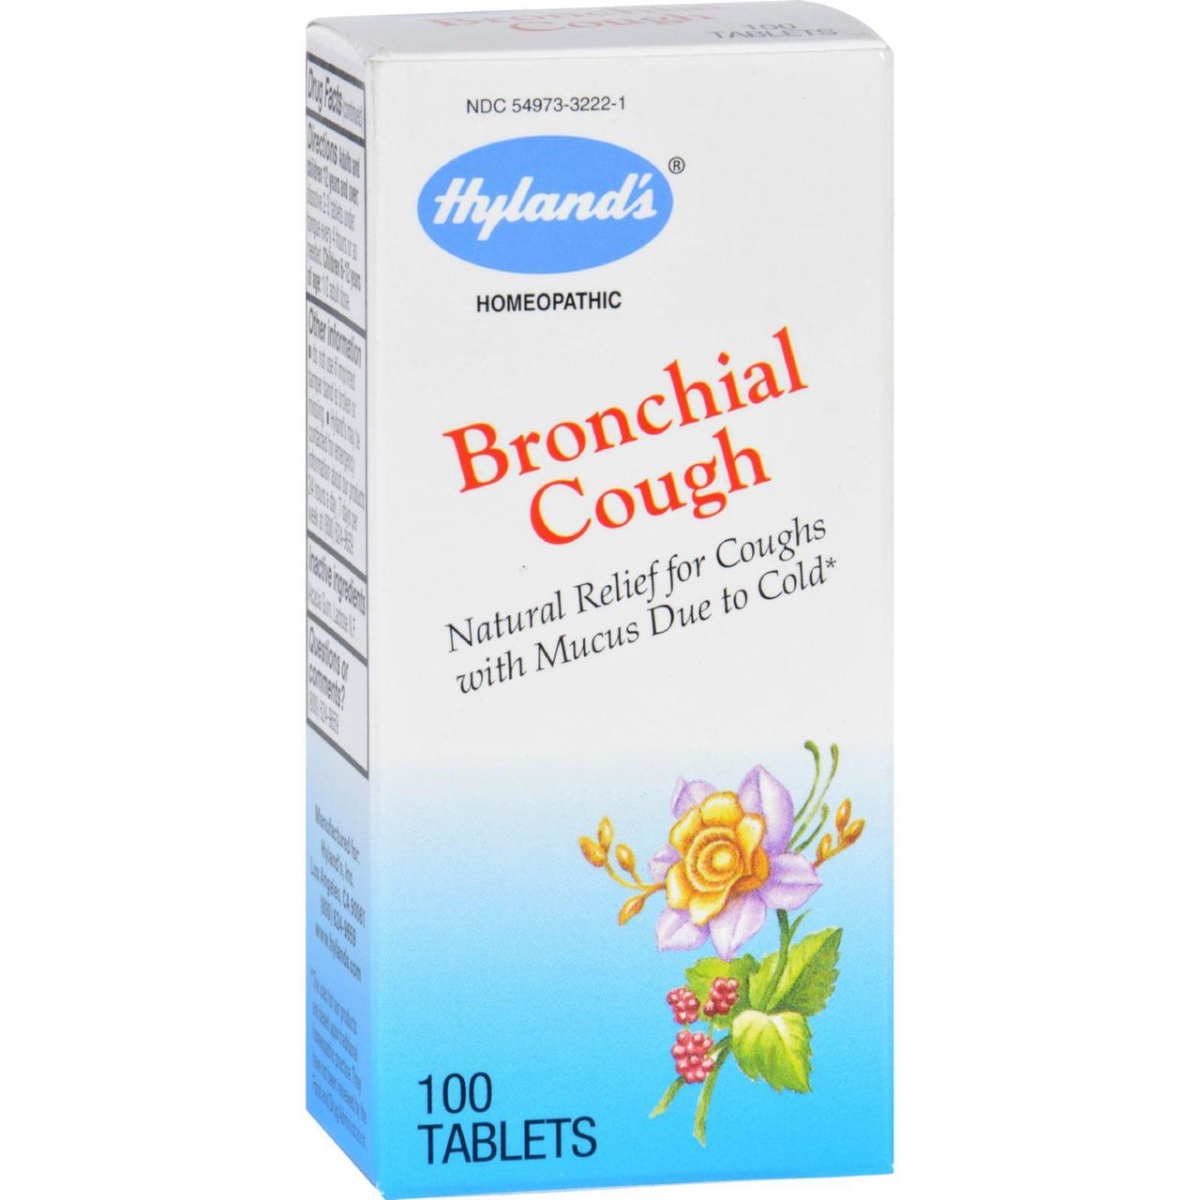 Hg1720275 Homeopathic Bronchial Cough - 100 Tablets